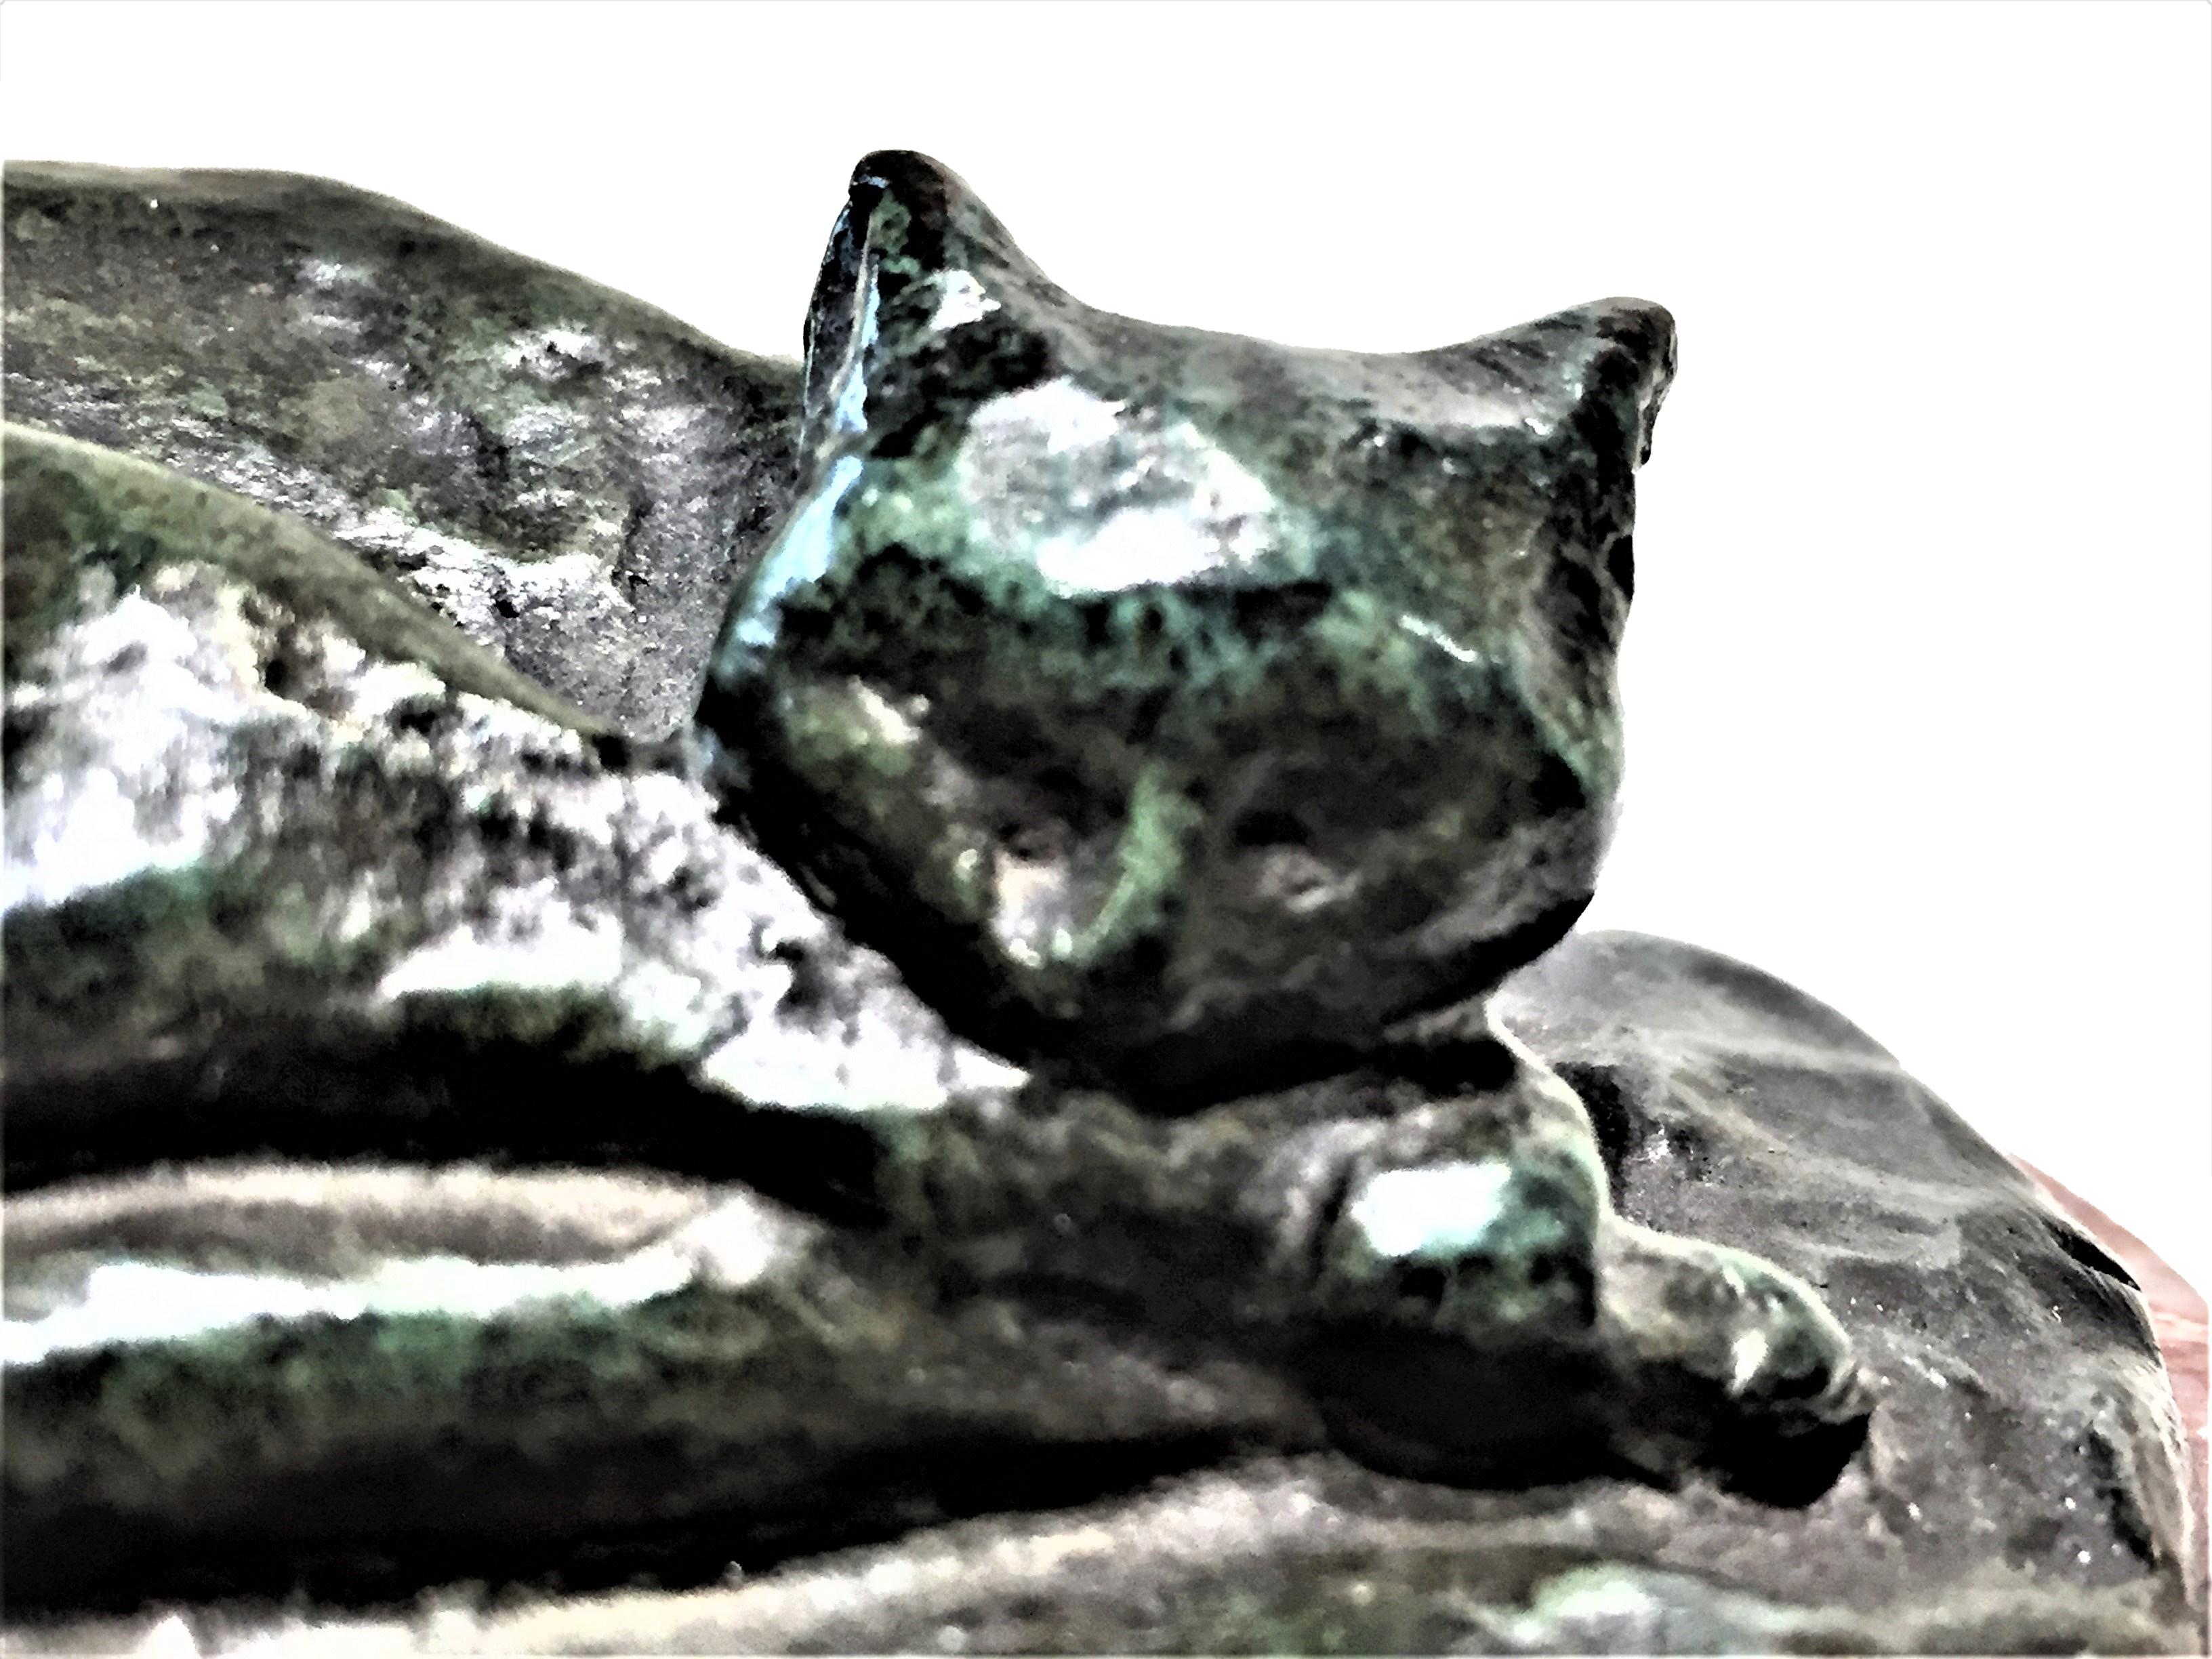 Signed with initials “MP.” and marked with three illegible stamps.

Dimensions: 
Height 1-3/4” (4.37cm) width 3-3/4” (9.37cm) depth 3-7/8” (9.7cm)

This charming sculptural paperweight, depicting a sleeping cat of dark-green patinated bronze on